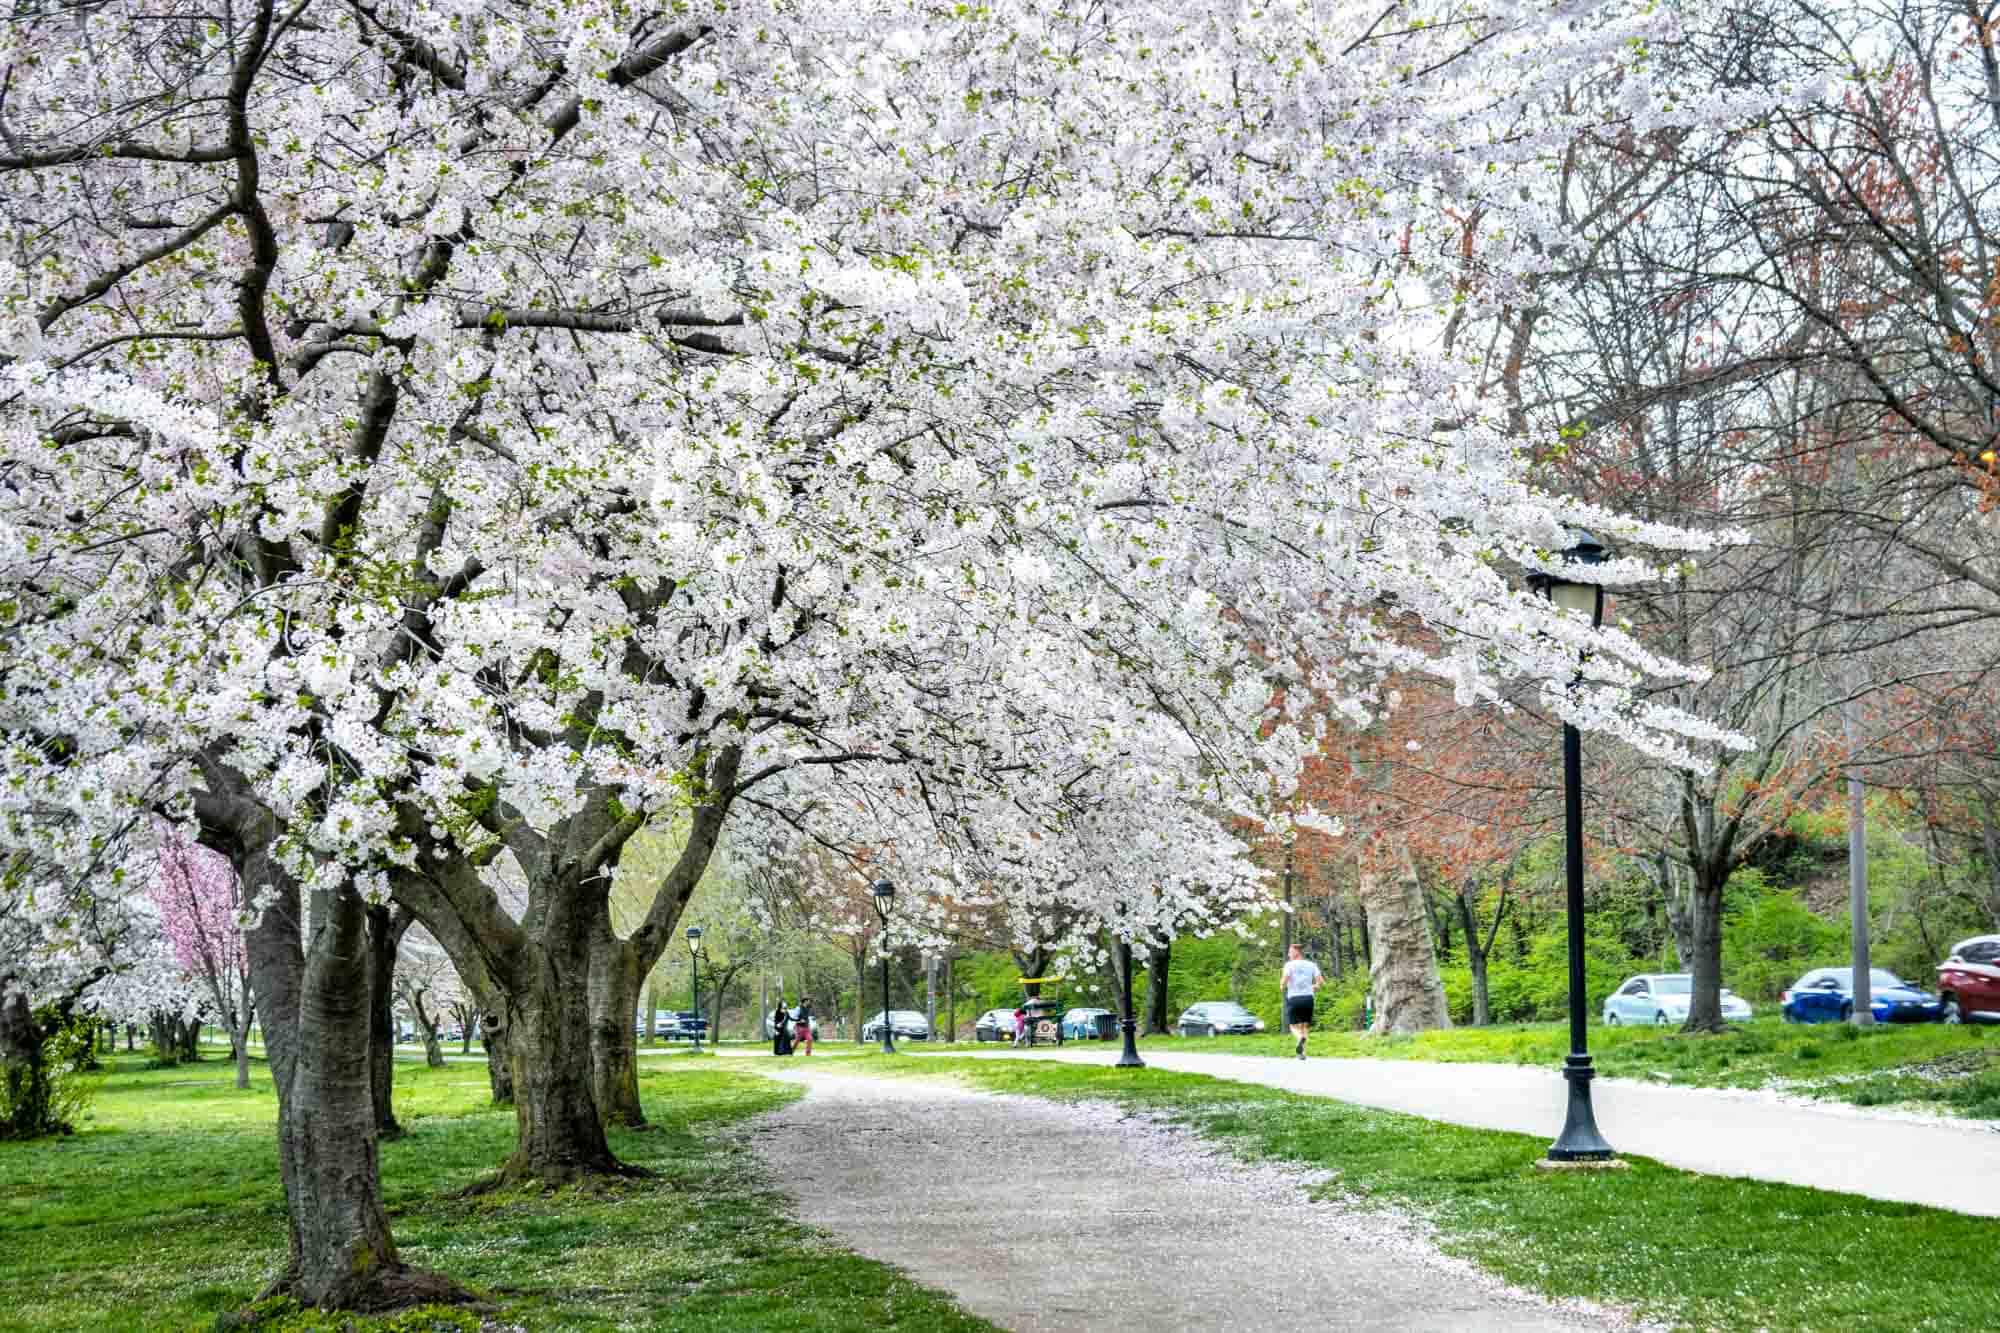 Cherry trees in full bloom with white blossoms next to a running trail